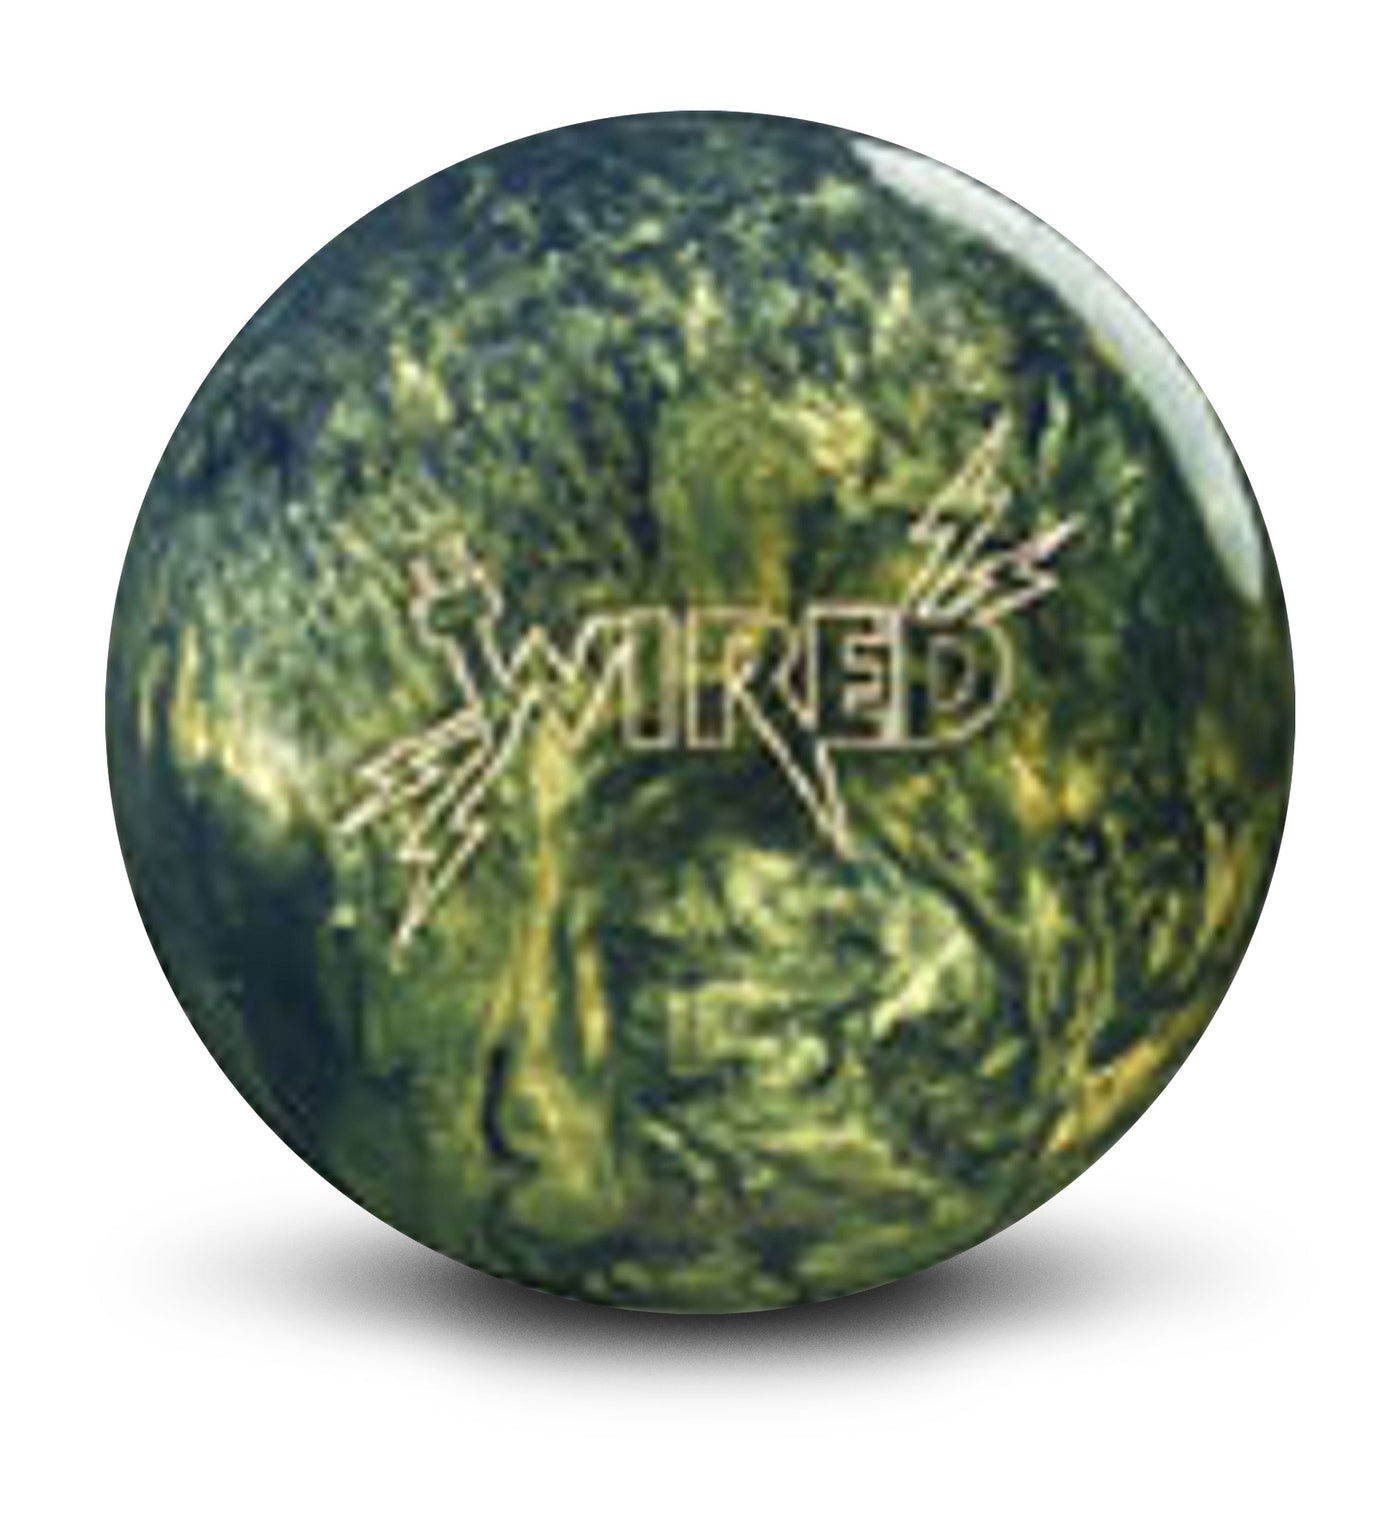 Wired bowling ball